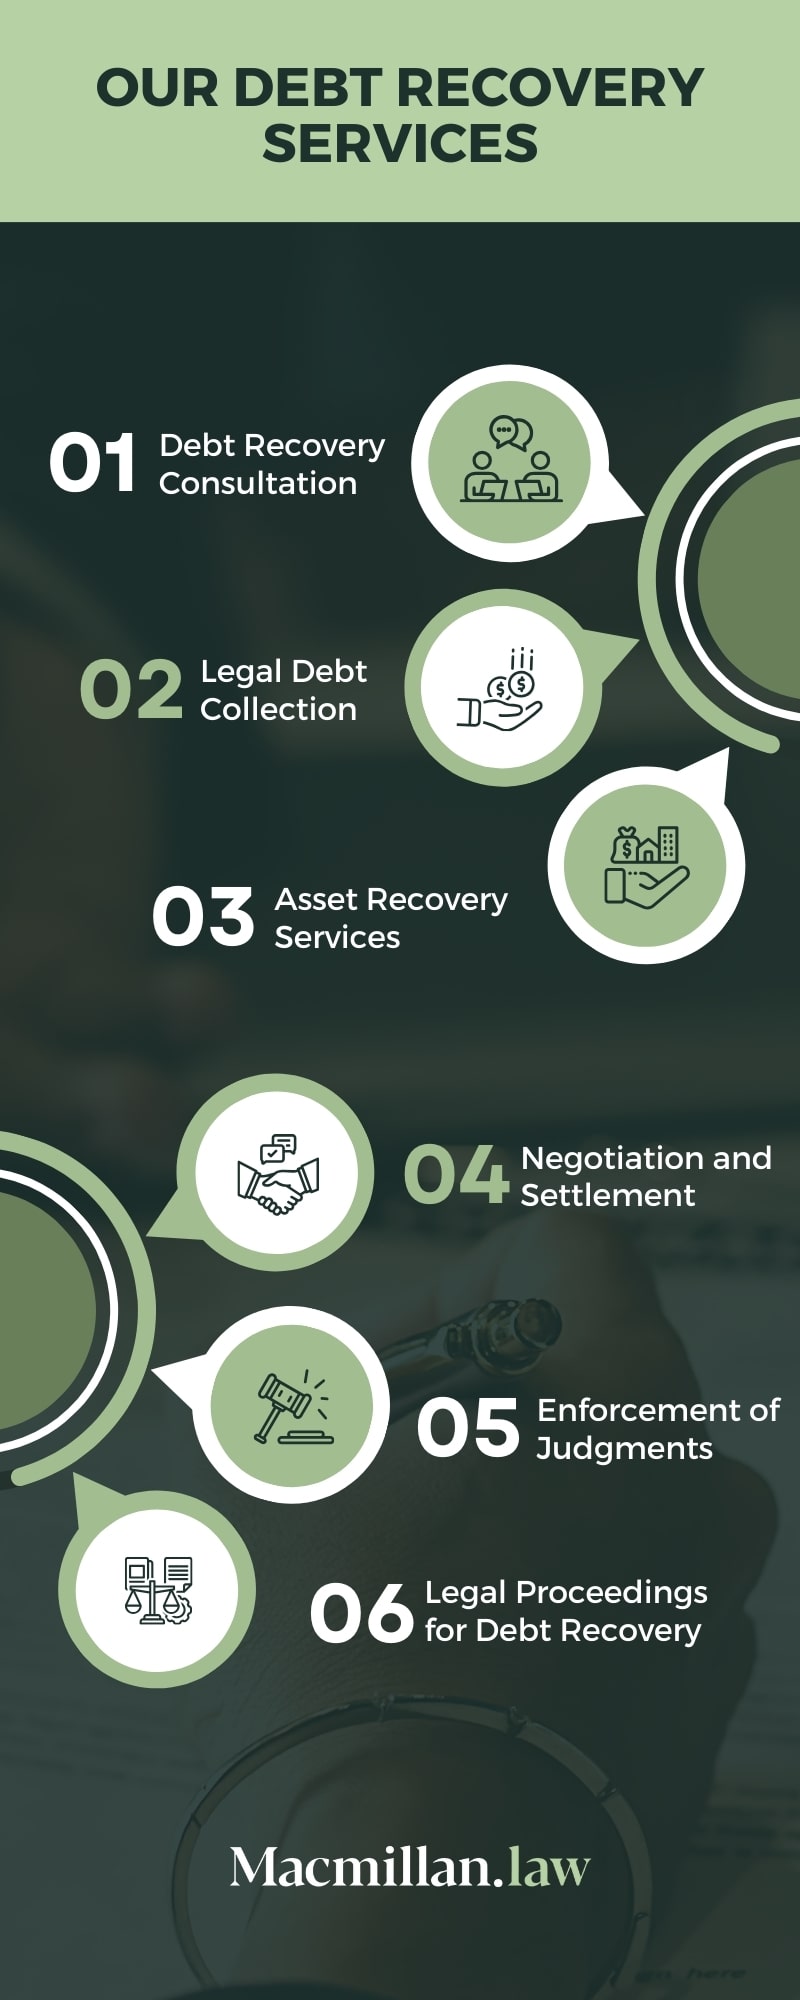 Our debt recovery services